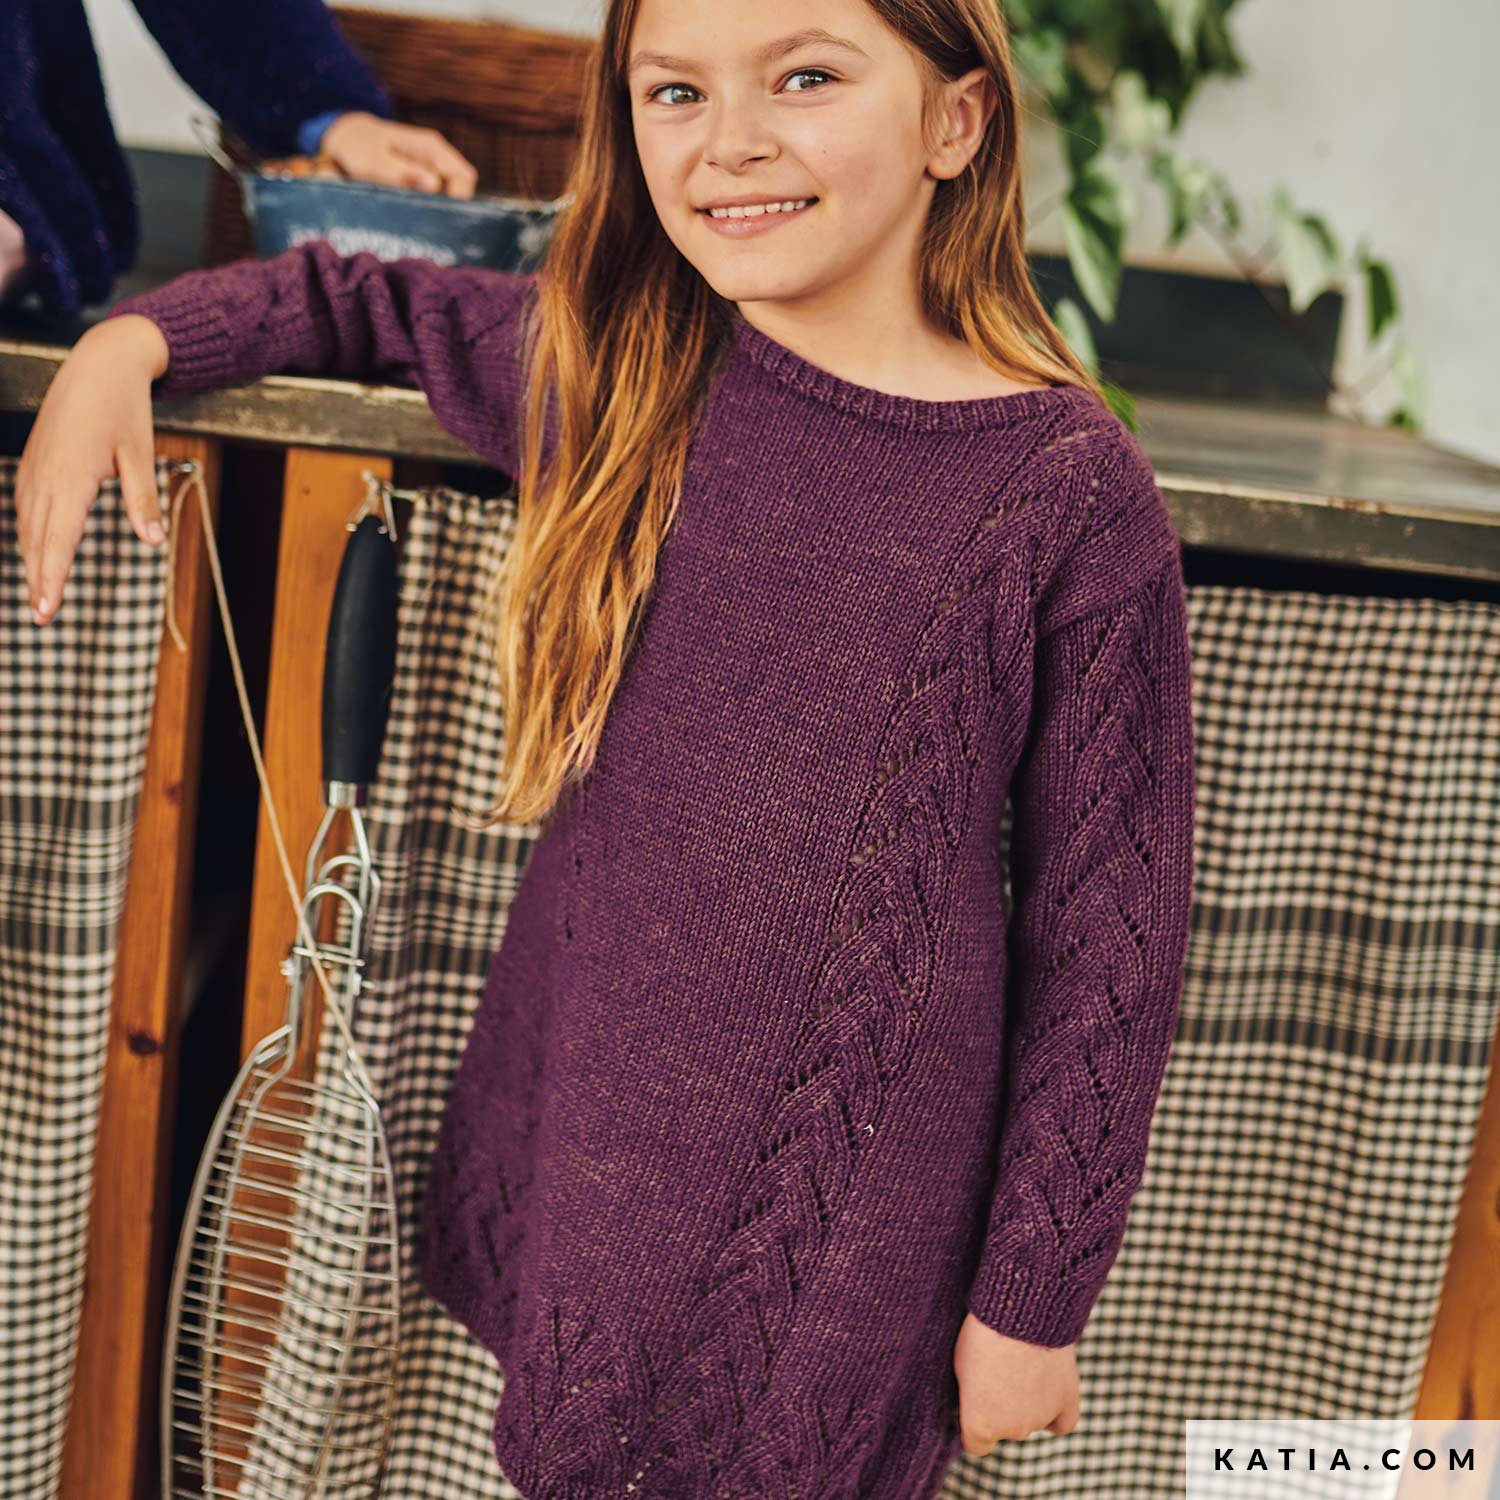 Oh-so-cute! That oversized knit looks like it's made for lace